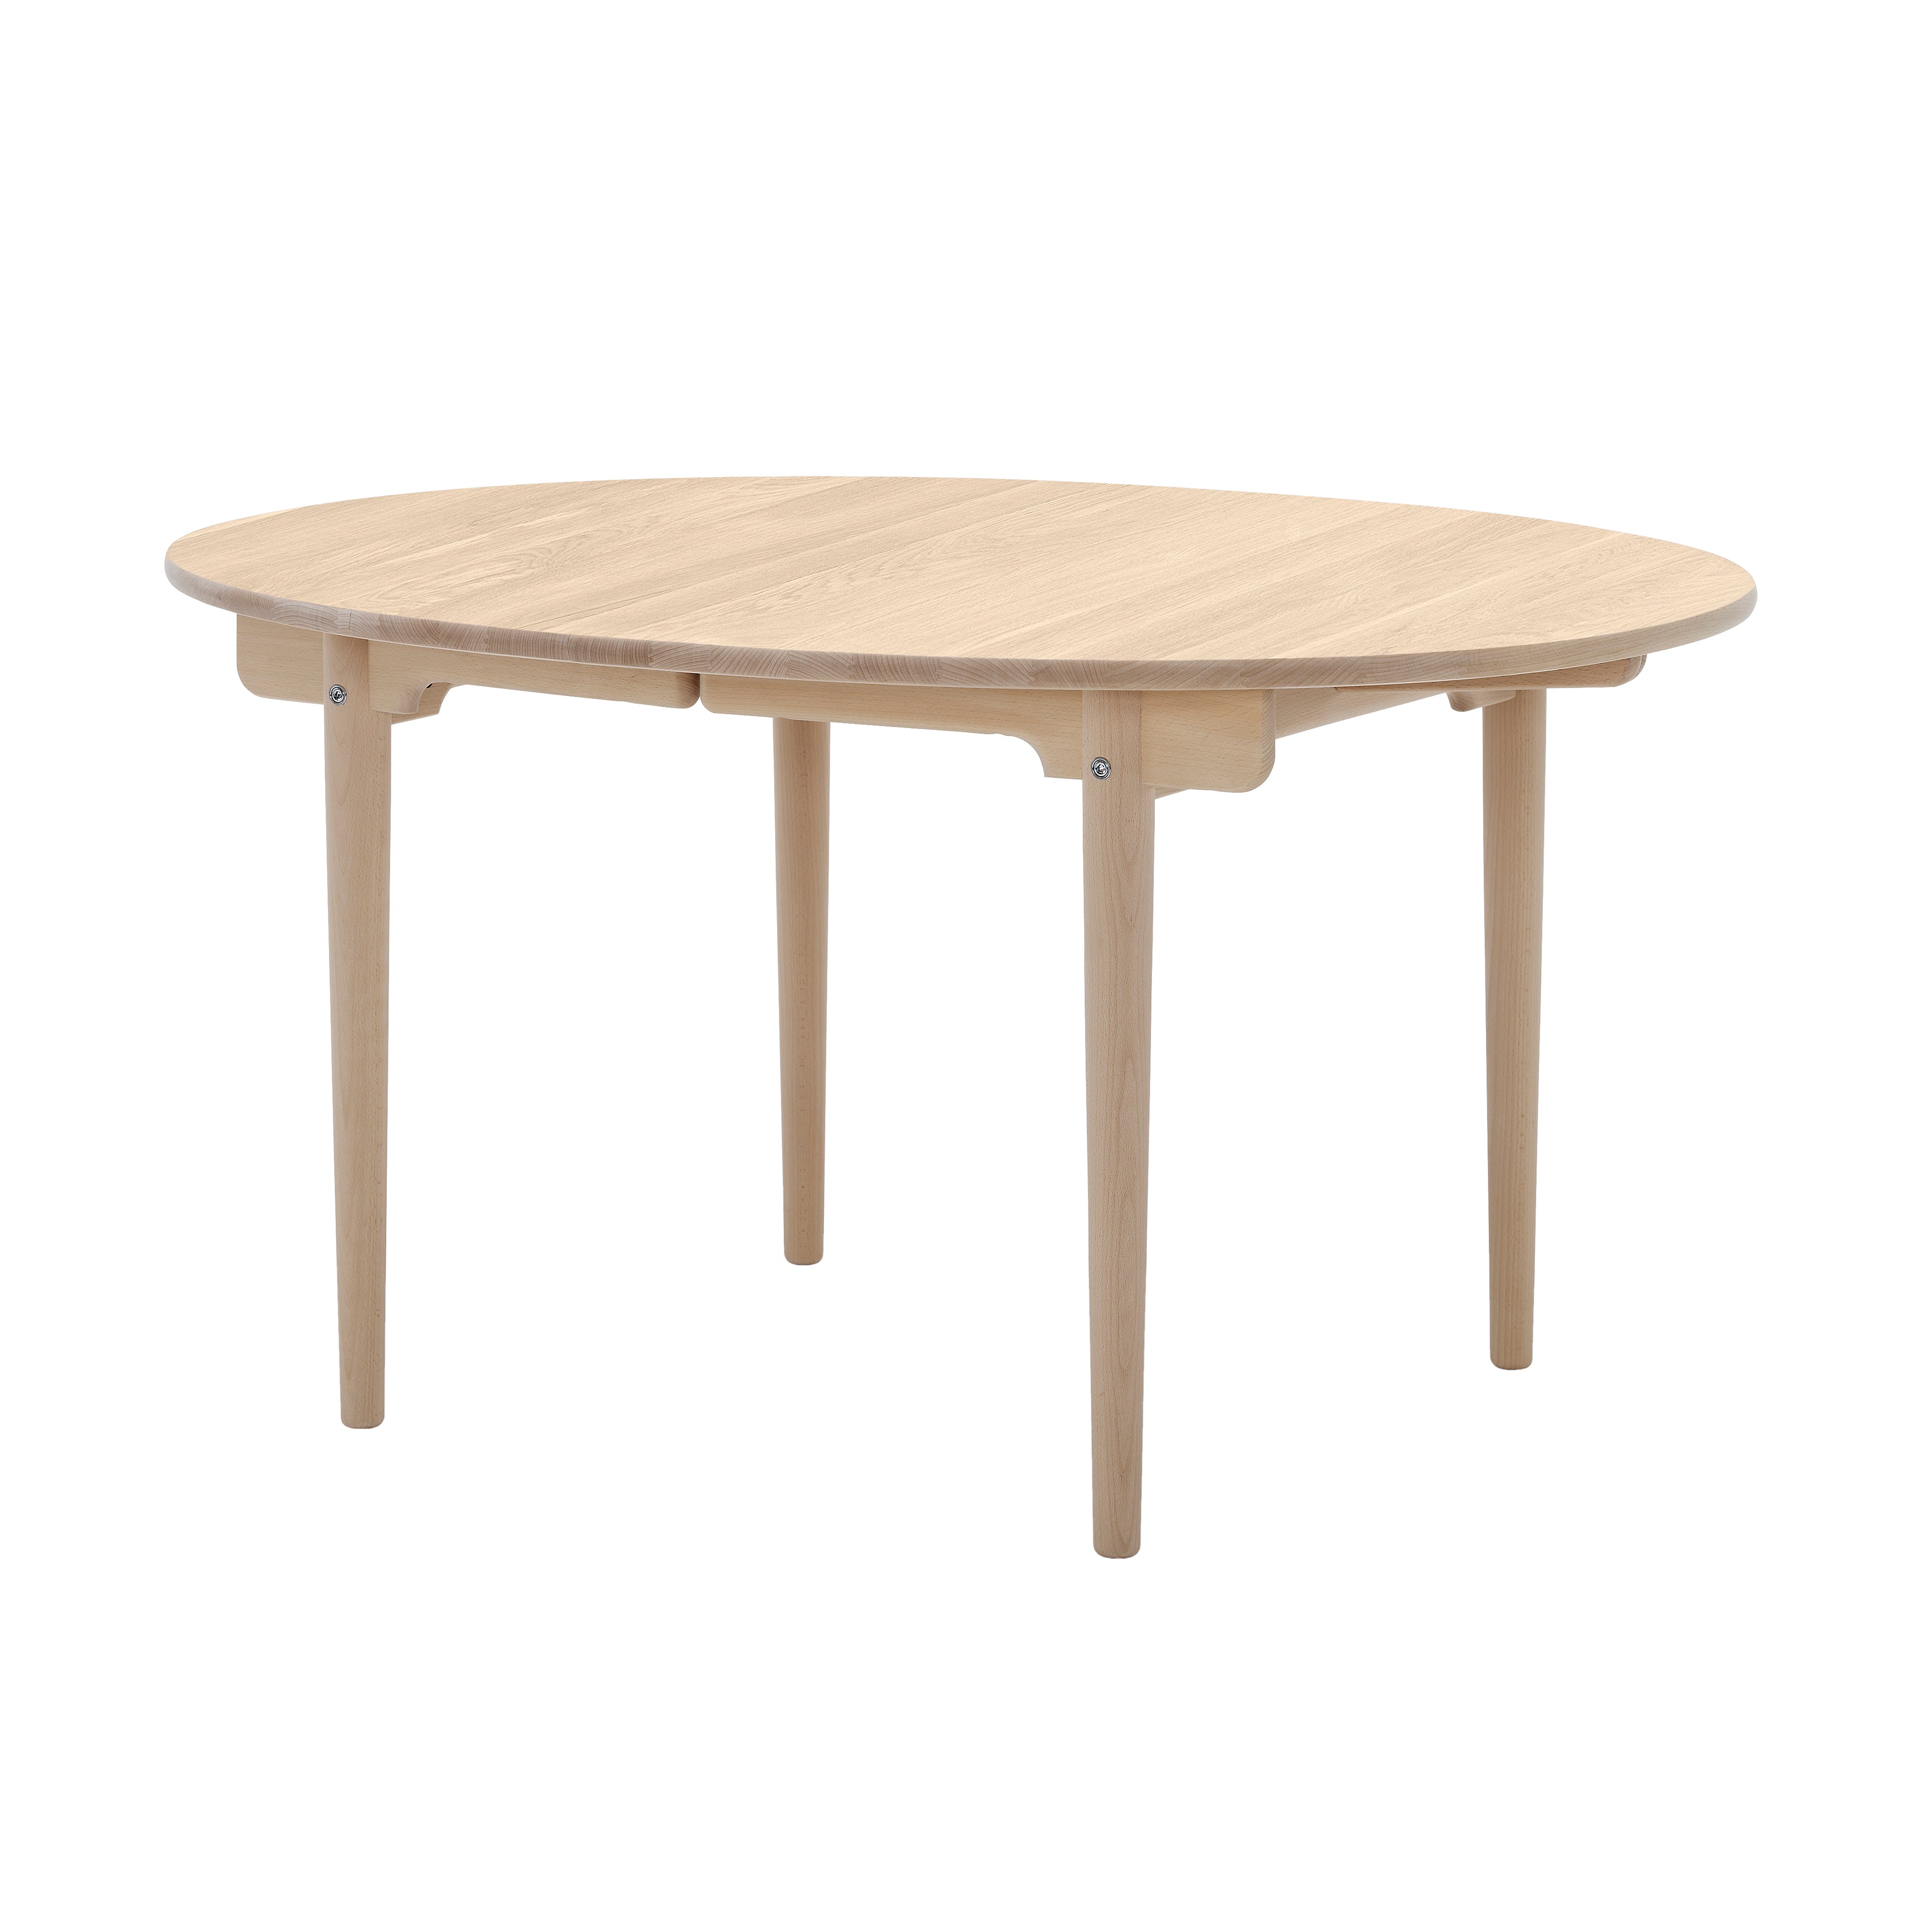 CH337 Dining Table: White Oiled Oak + Without Leaf